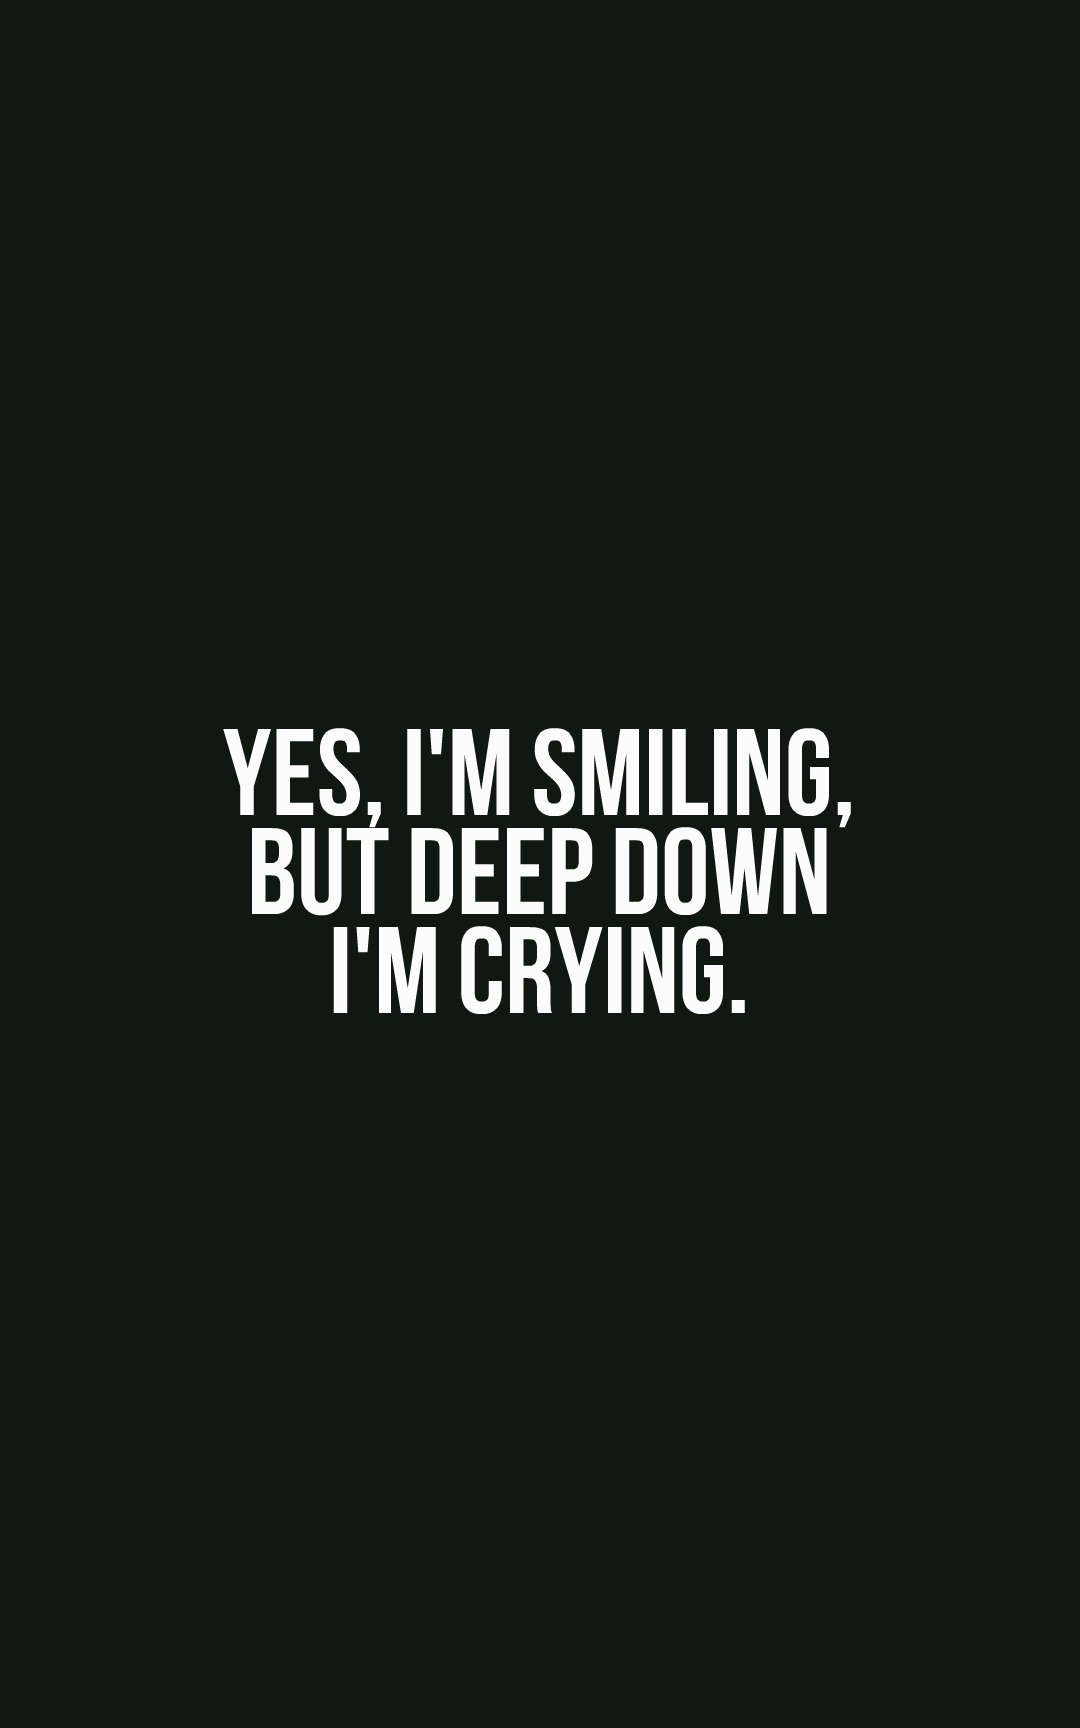 Yes, I'm smiling, but deep down I'm crying.